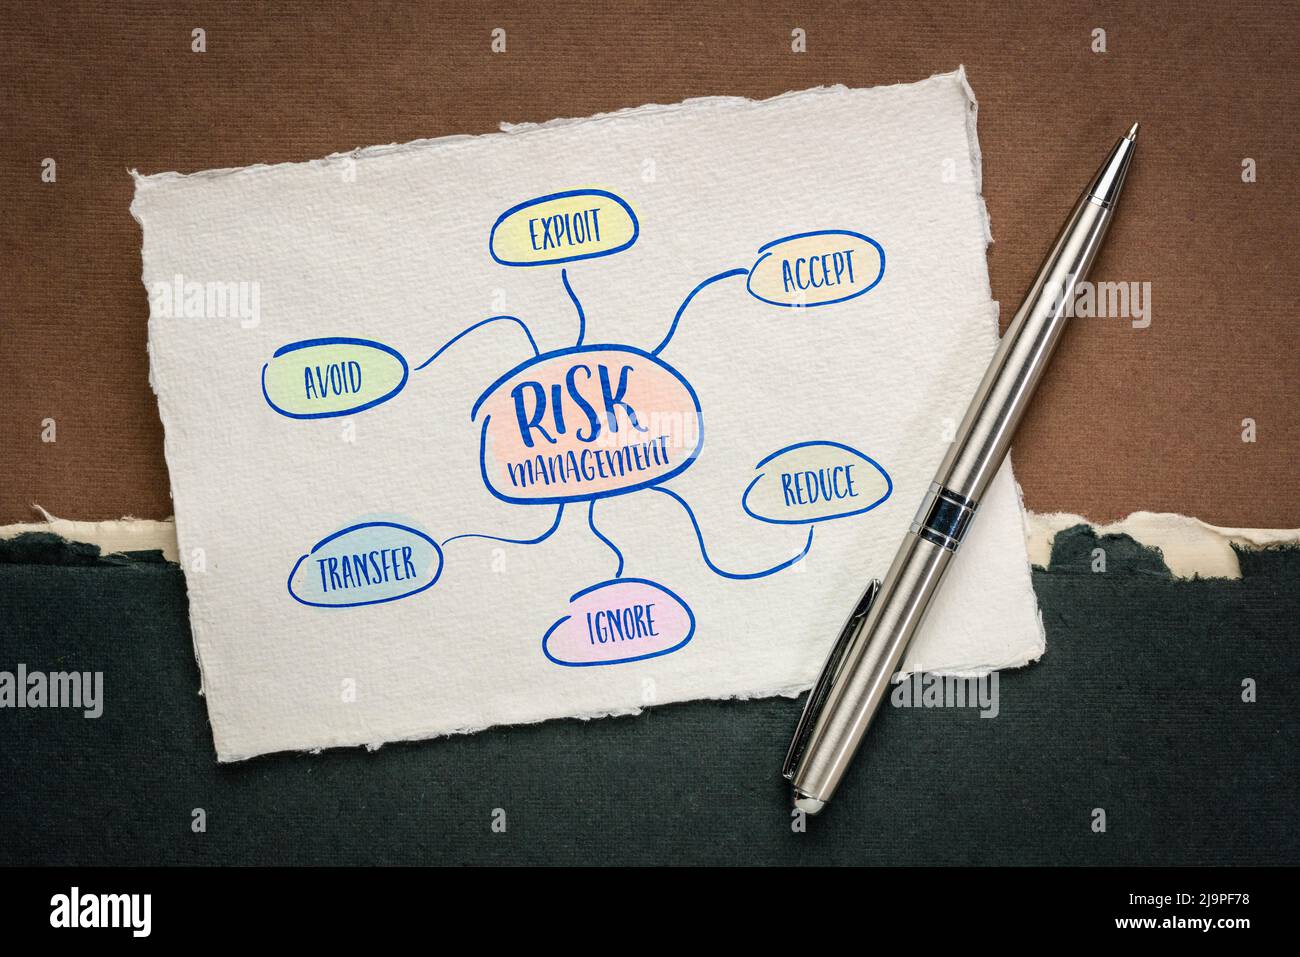 risk management flow chart or mind map - a sketch on a handmade paper, business concept Stock Photo